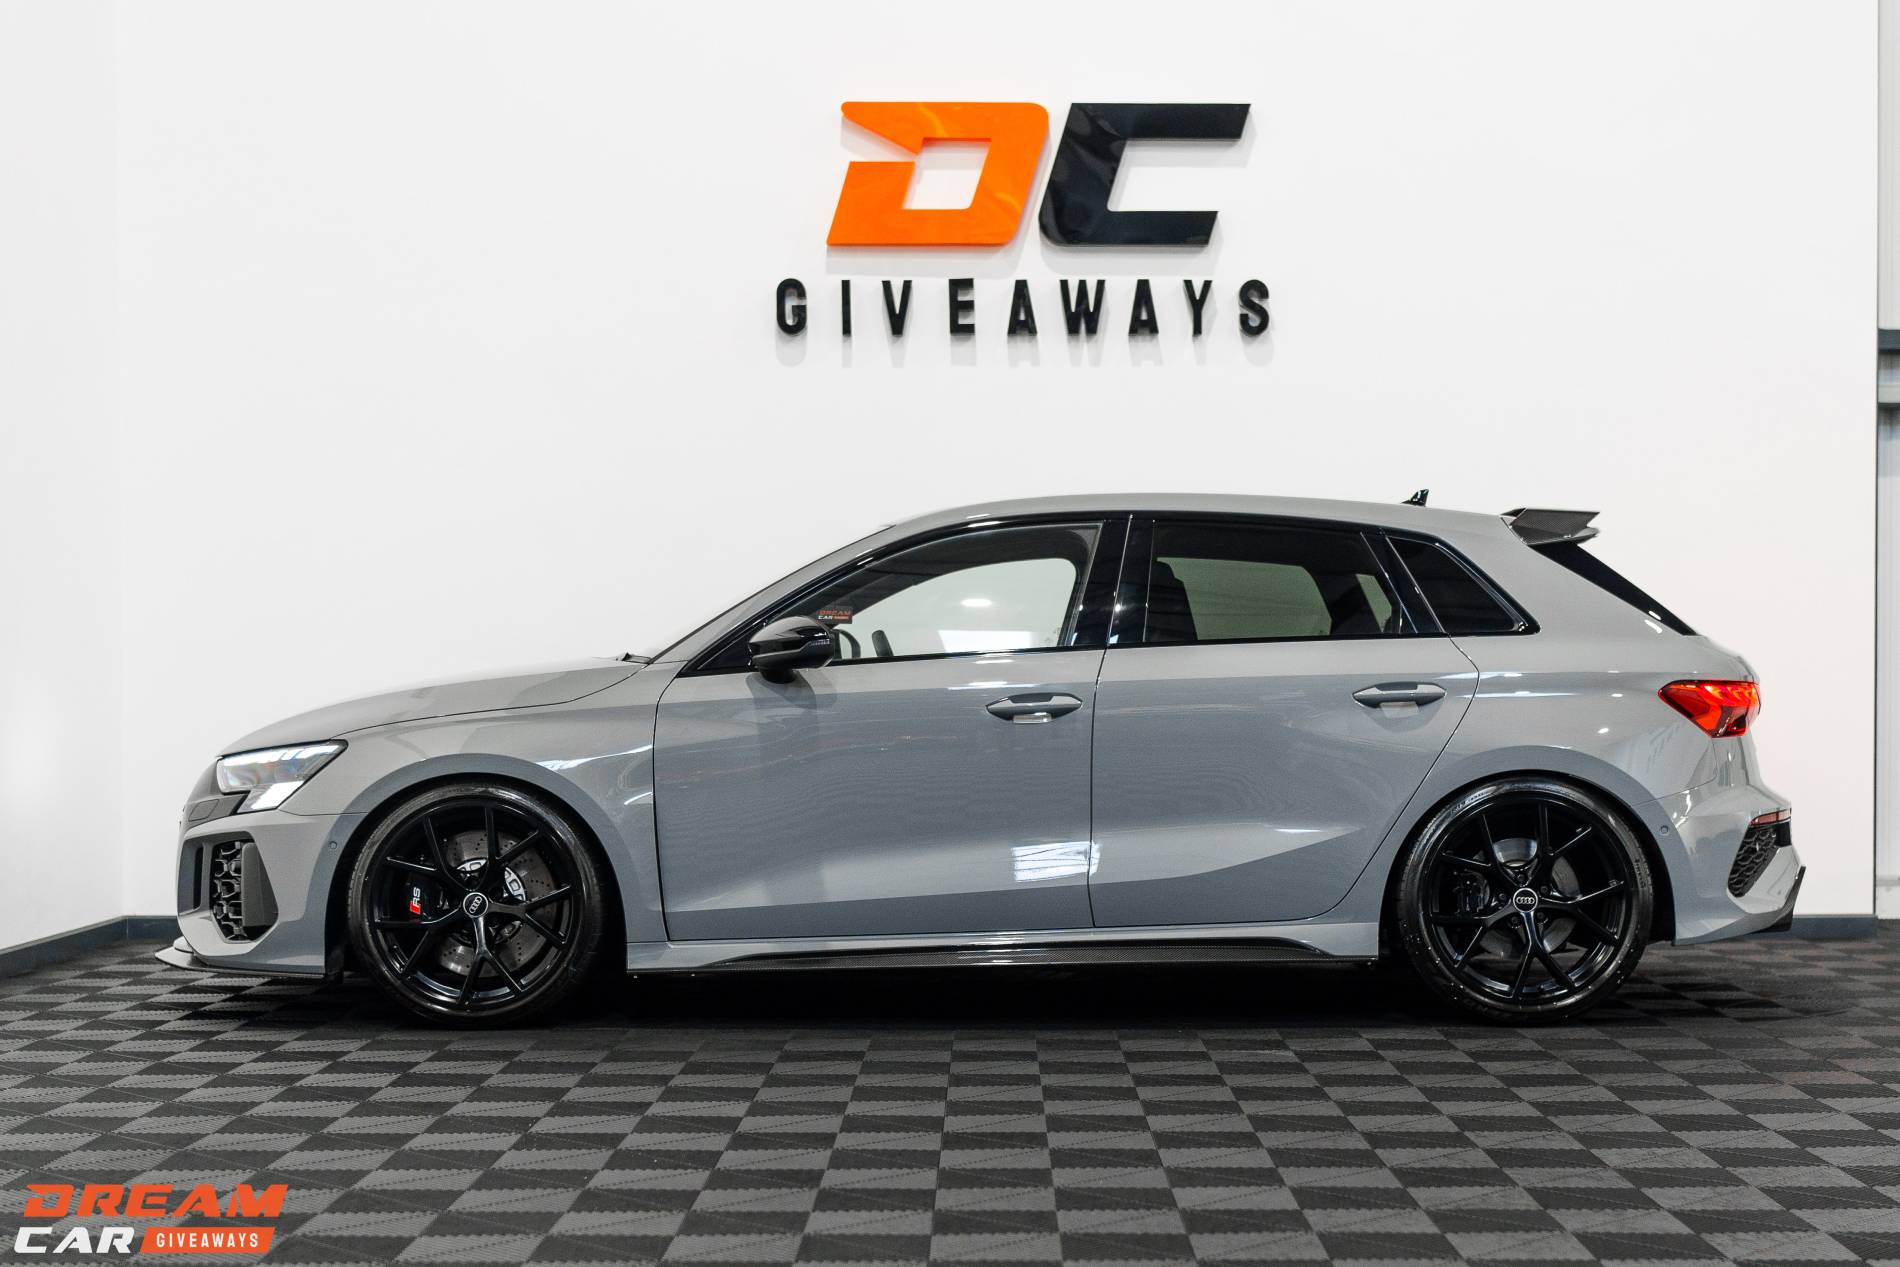 Win This Audi RS3 Vorsprung & £1,000 or £52,000 Tax Free